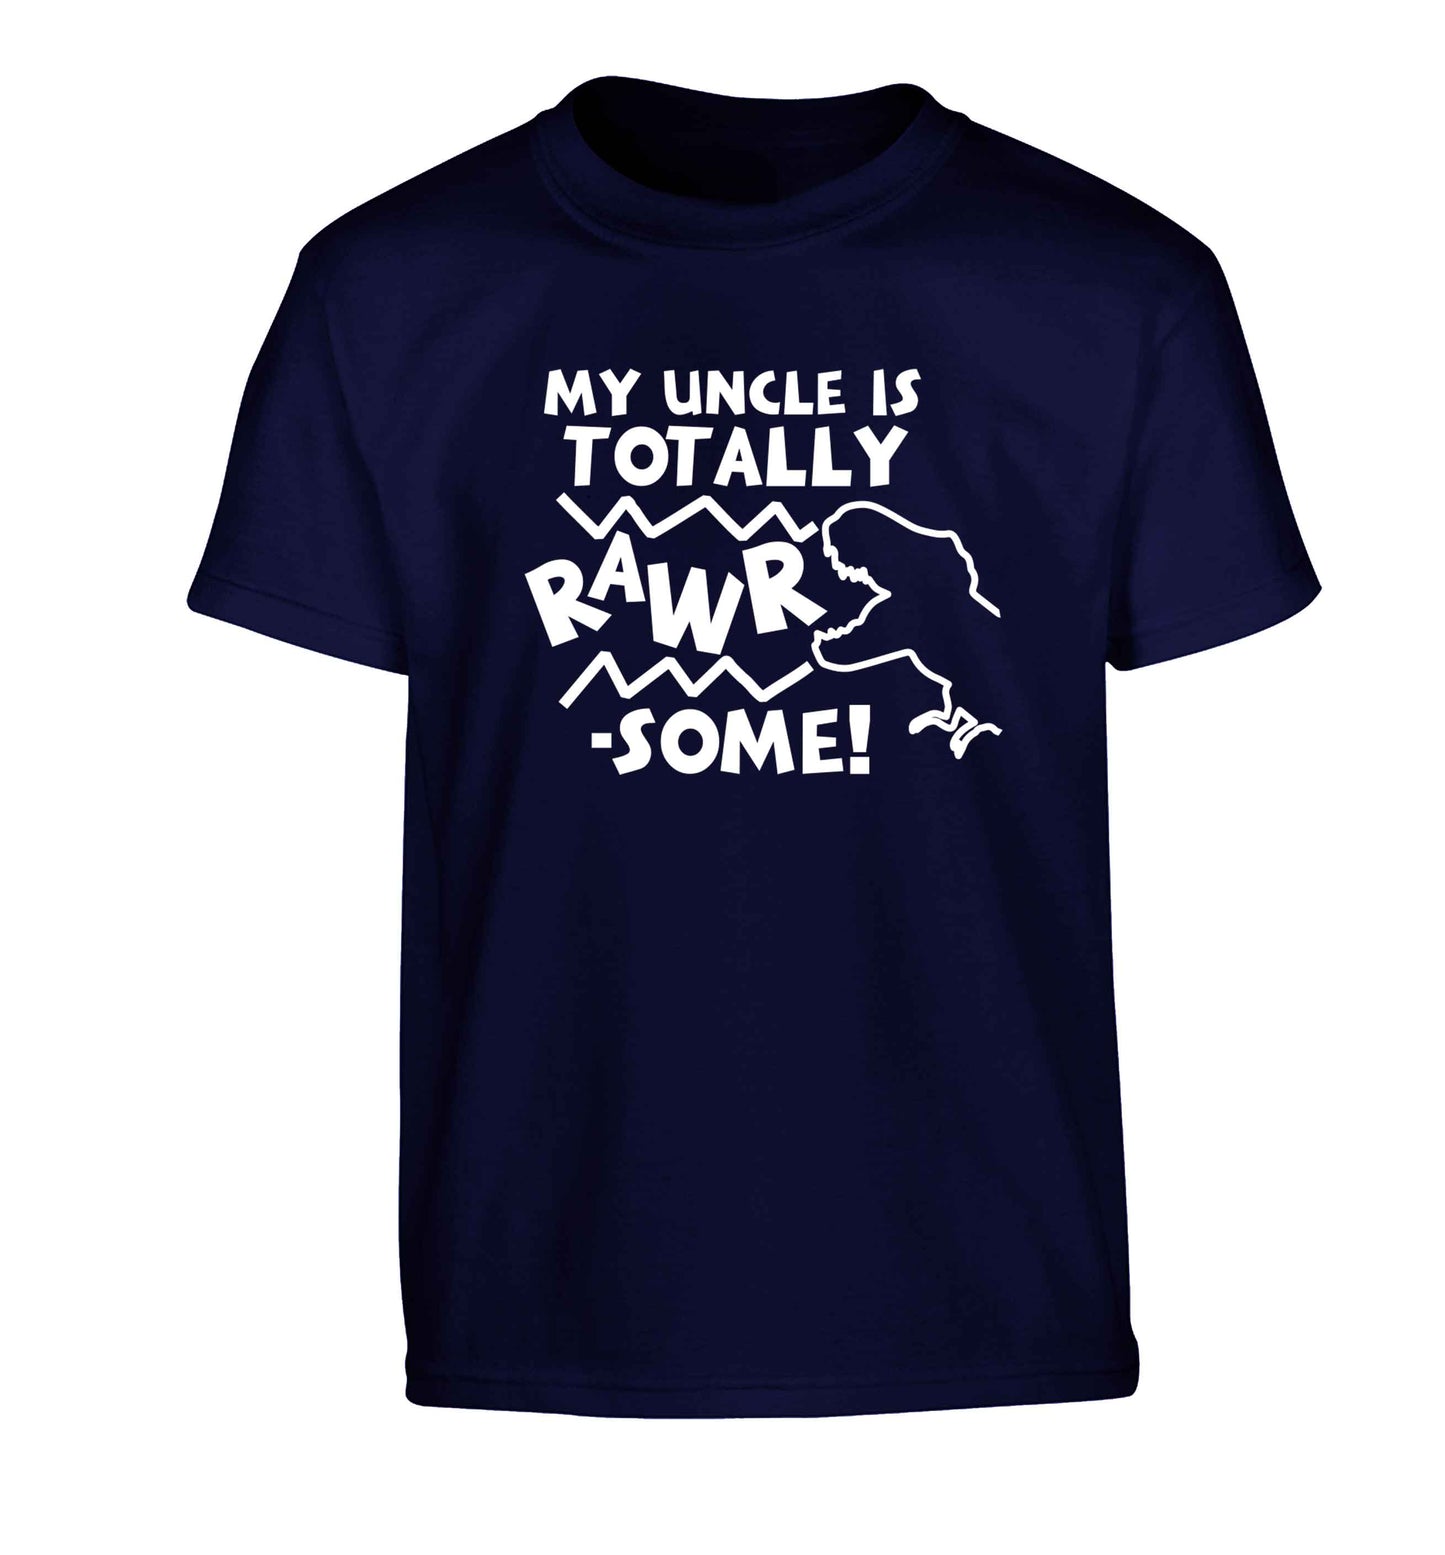 My uncle is totally rawrsome Children's navy Tshirt 12-13 Years